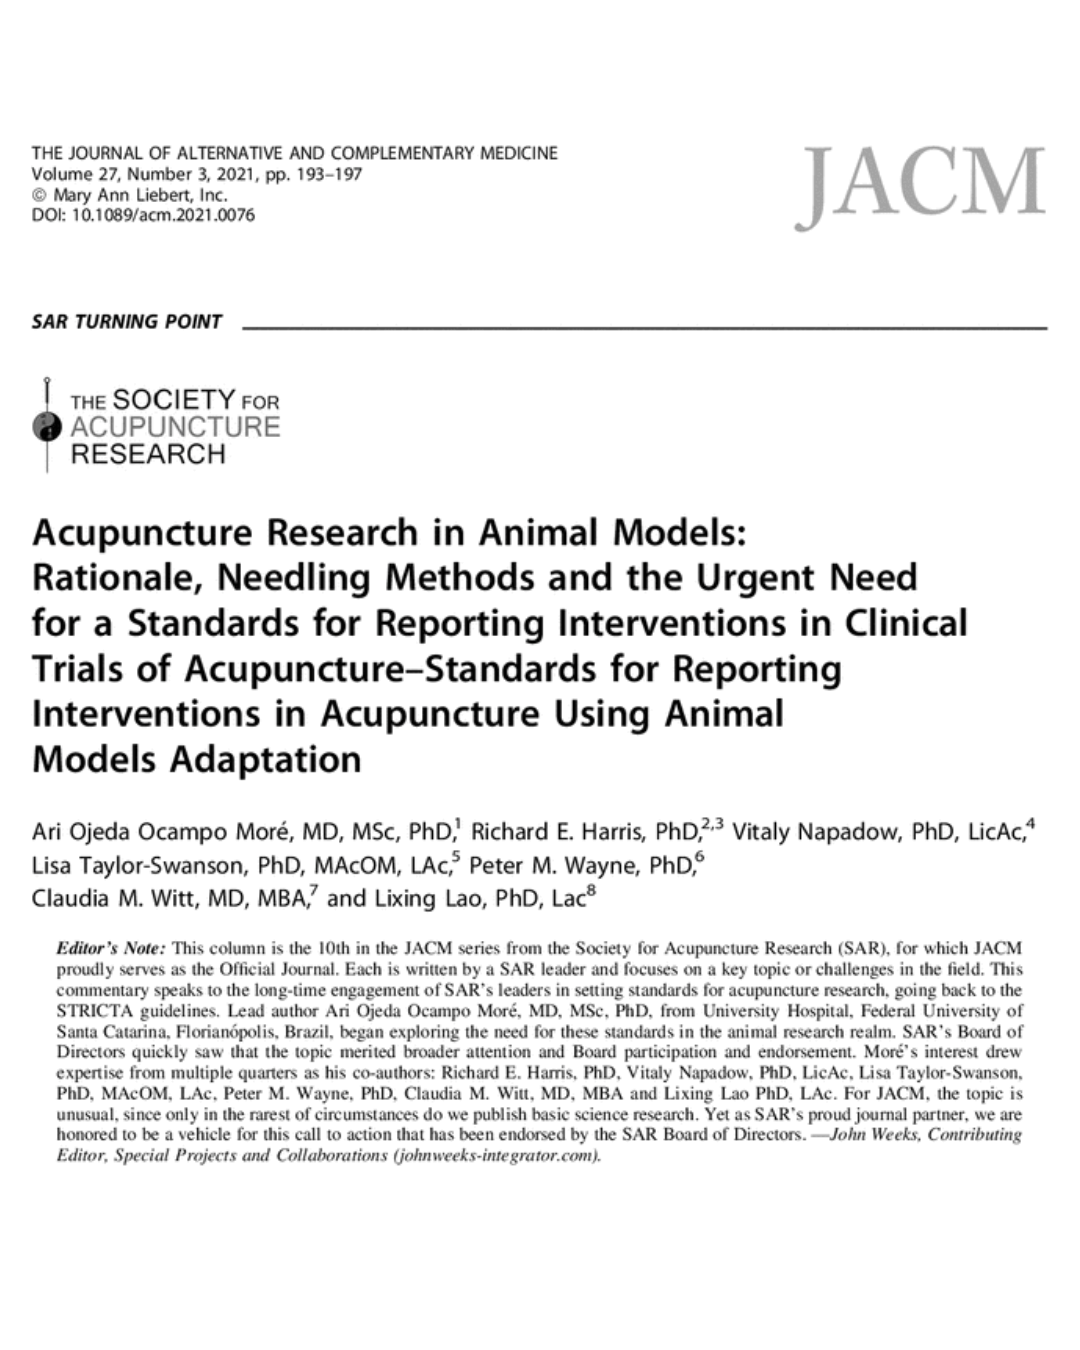 Acupuncture Research in Animal Models